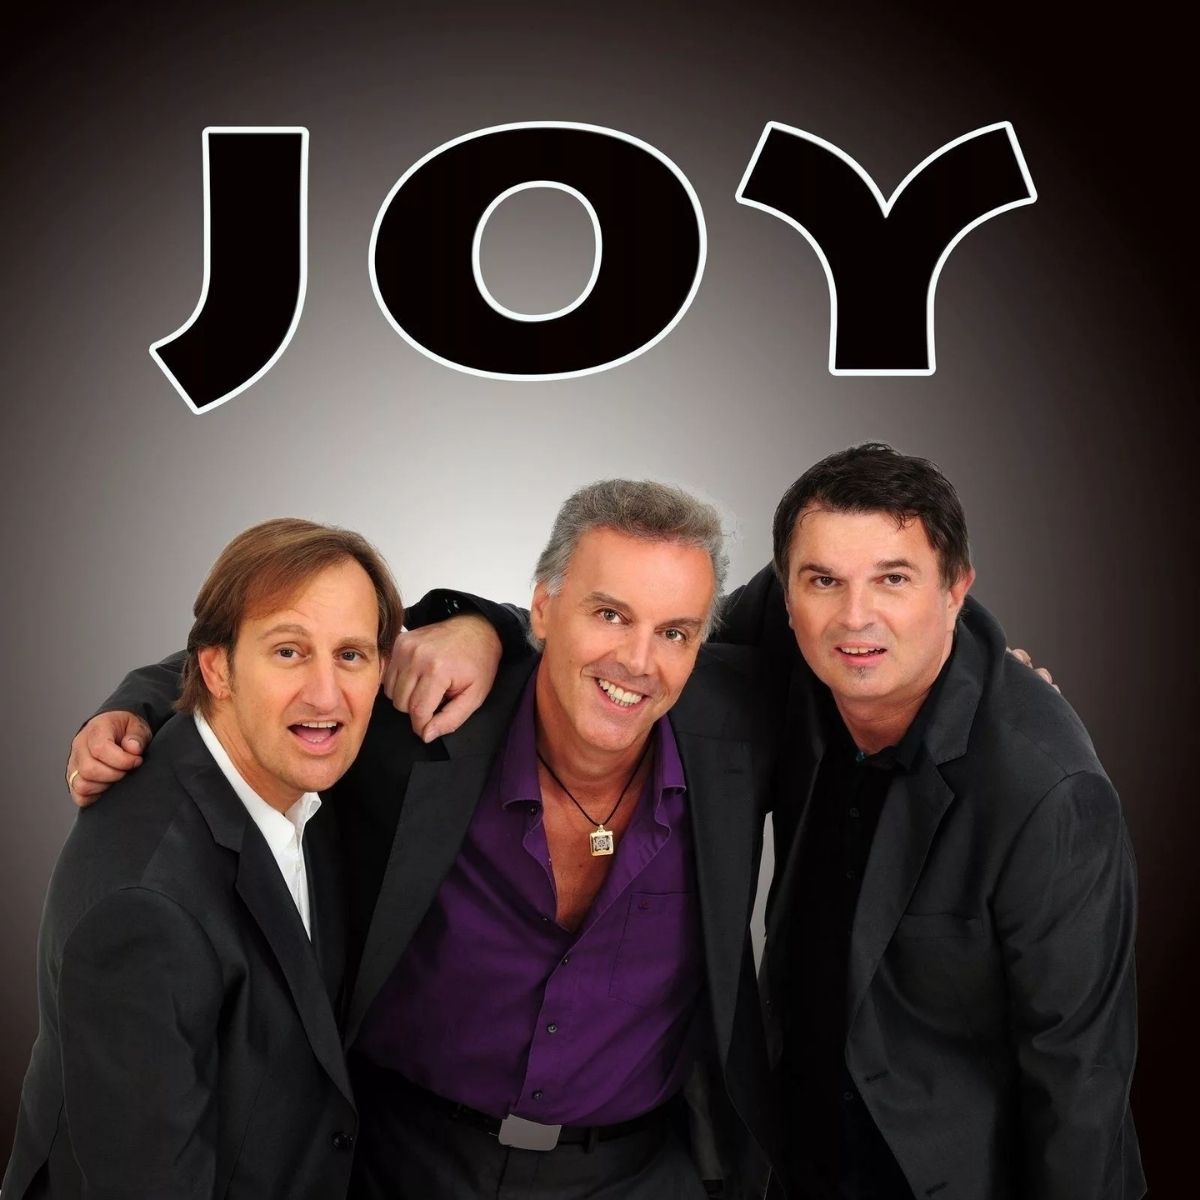 One of the professional photos of the group "Joy"